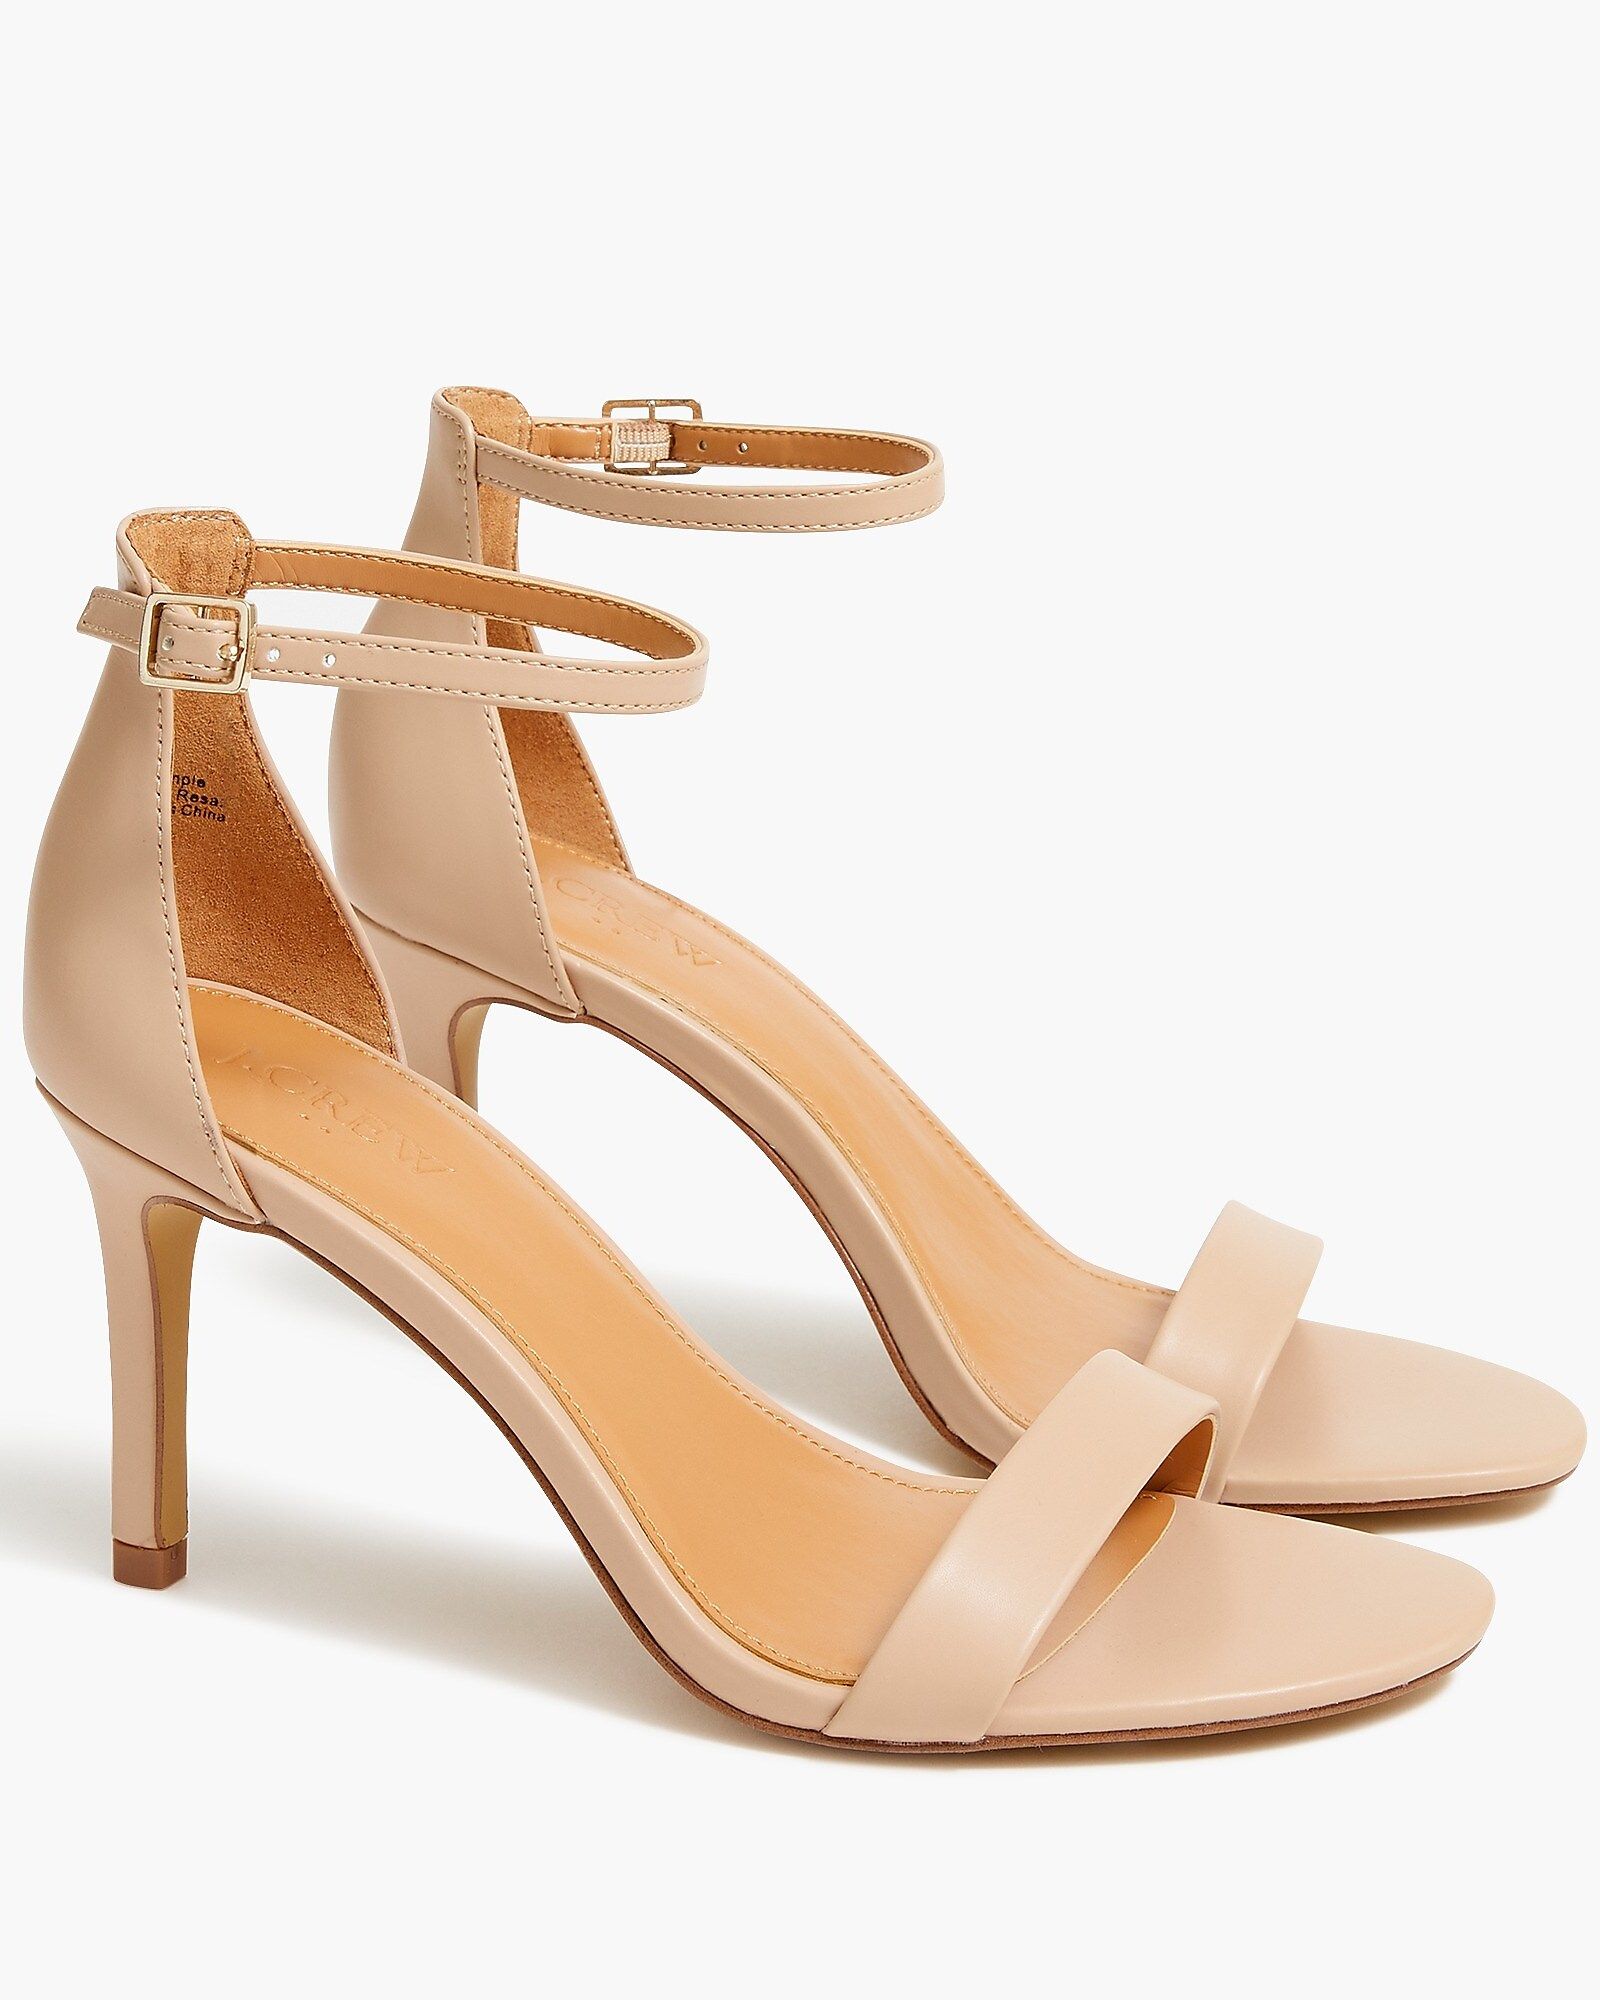 Ankle-strap heeled sandals | J.Crew Factory